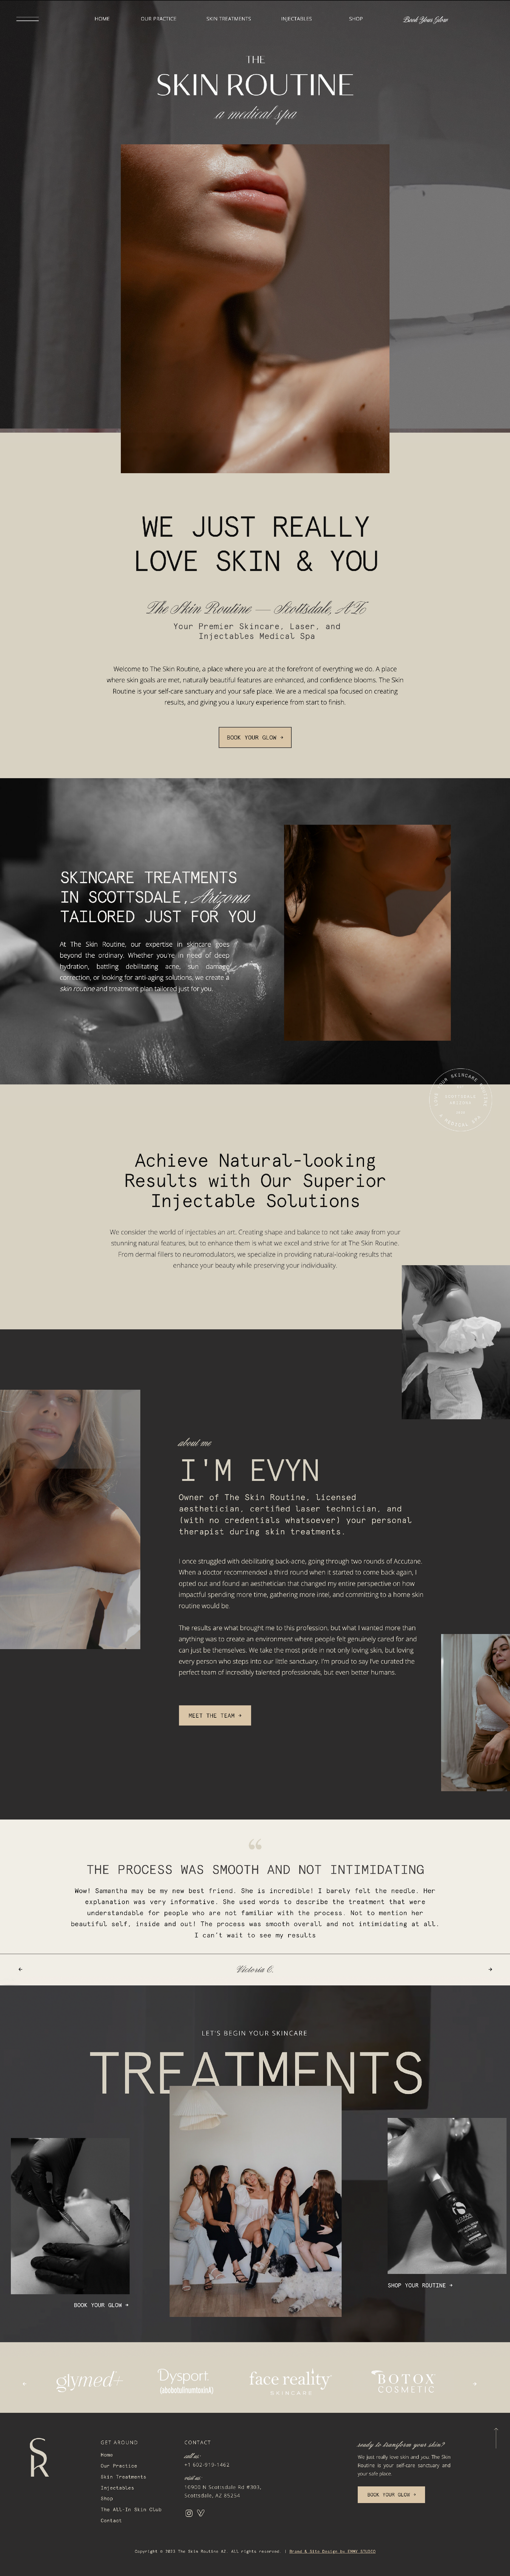 Showit Website Design for a Wellness Skincare Brand by Emmy Studio